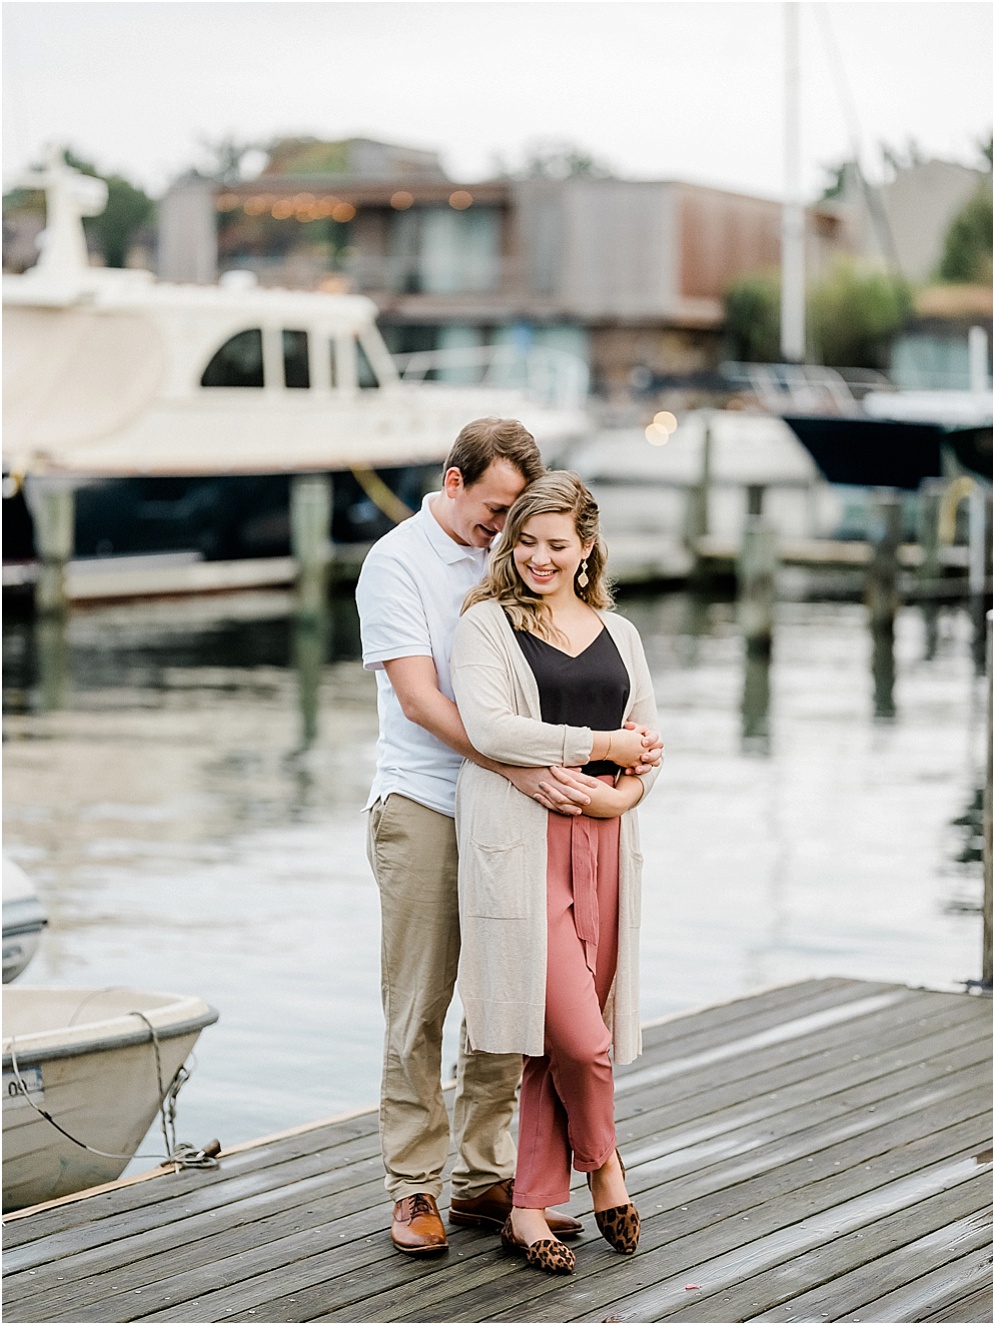 A playful and colorful downtown Annapolis photo session.